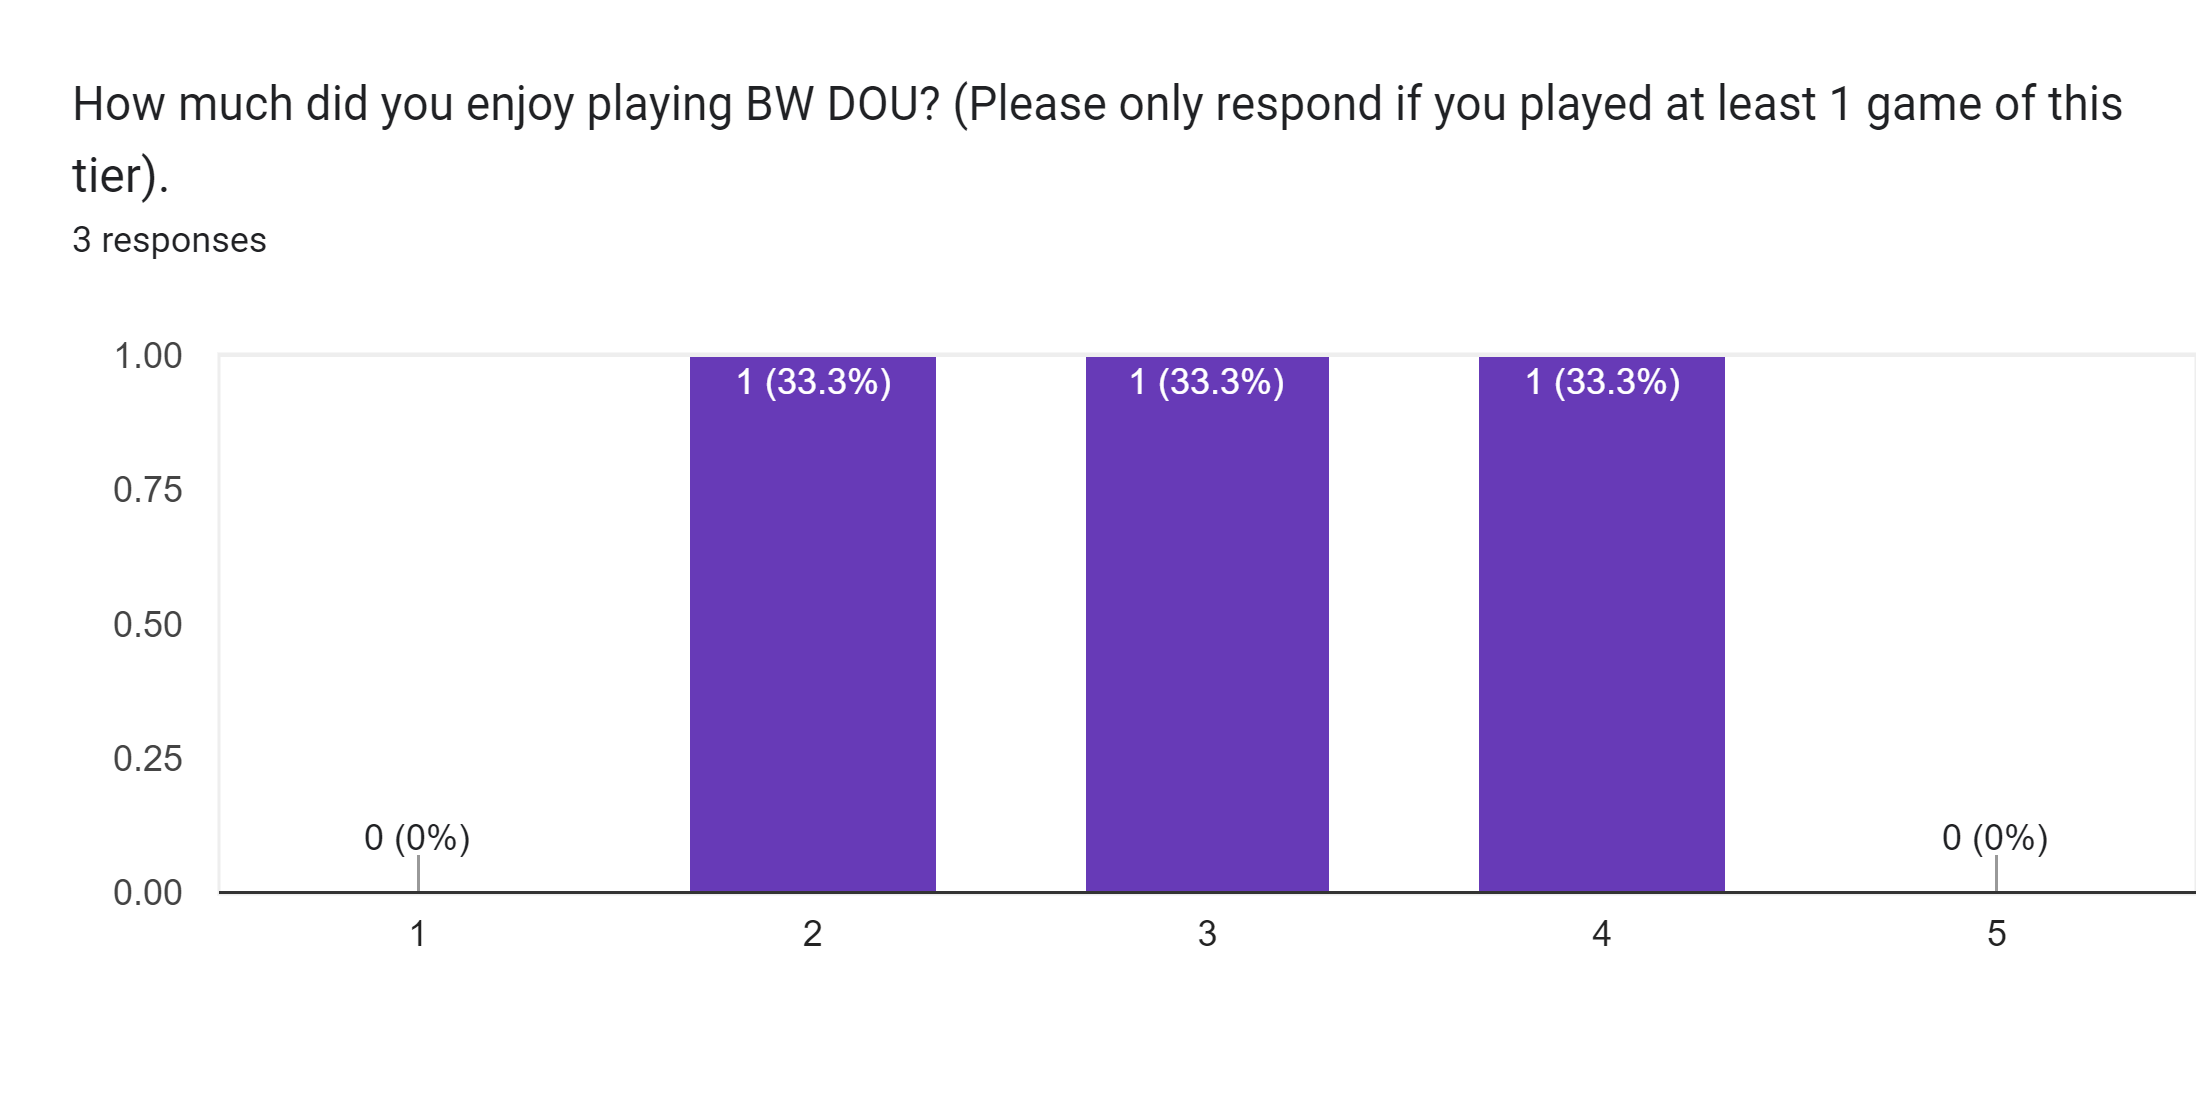 Forms response chart. Question title: How much did you enjoy playing BW DOU? (Please only respond if you played at least 1 game of this tier).. Number of responses: 3 responses.